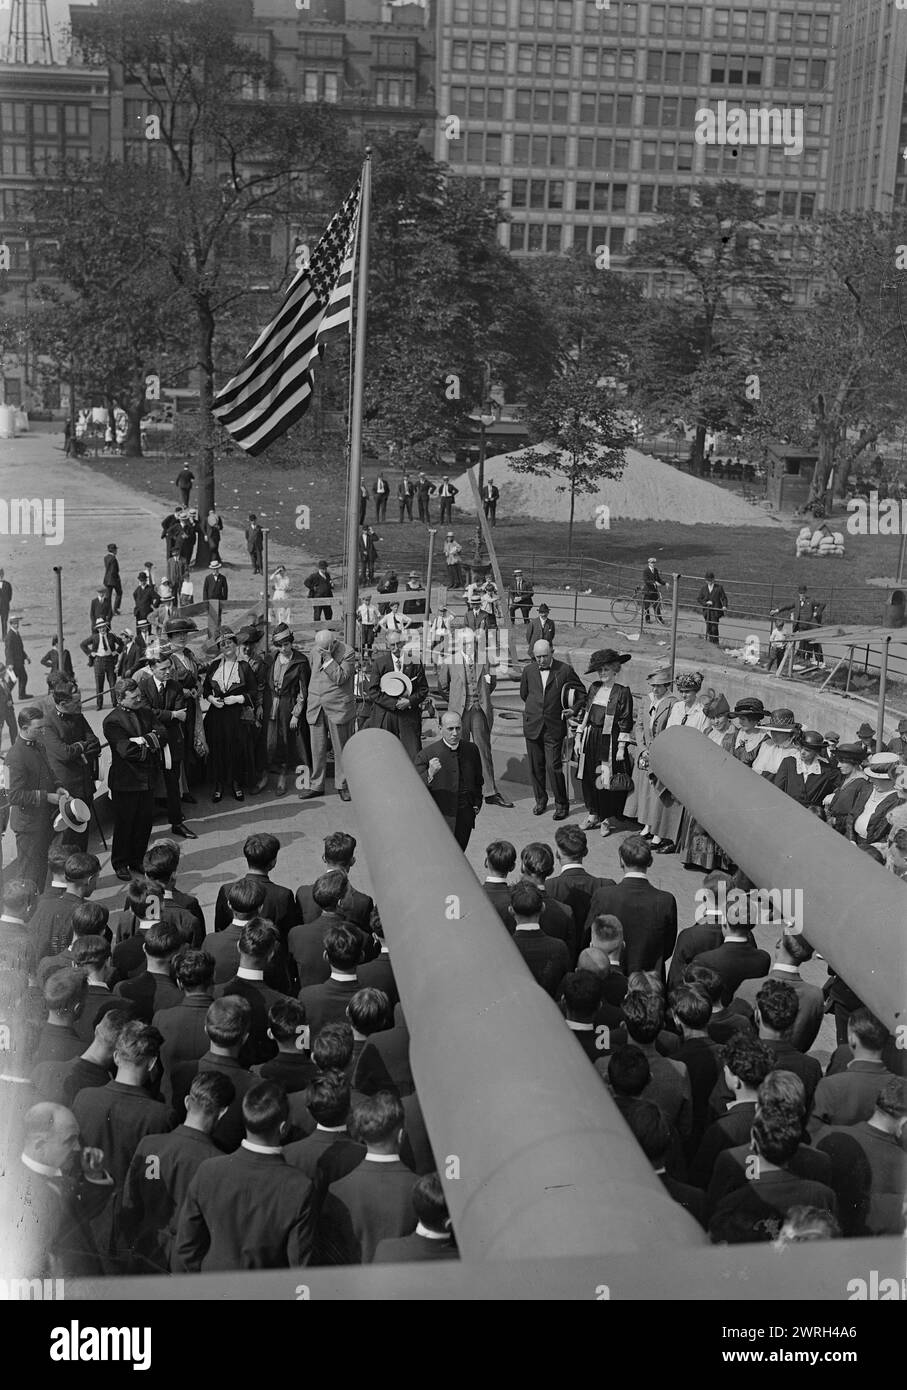 Reverend Herbert Shipman addressing recruits, 1917. Episcopal suffragen bishop and military chaplain Herbert Shipman (1869-1930), addressing Navy recruits under the guns of the U.S.S. Recruit, a fake battleship built in Union Square, New York City by the Navy to recruit seamen and sell Liberty Bonds during World War I. Stock Photo